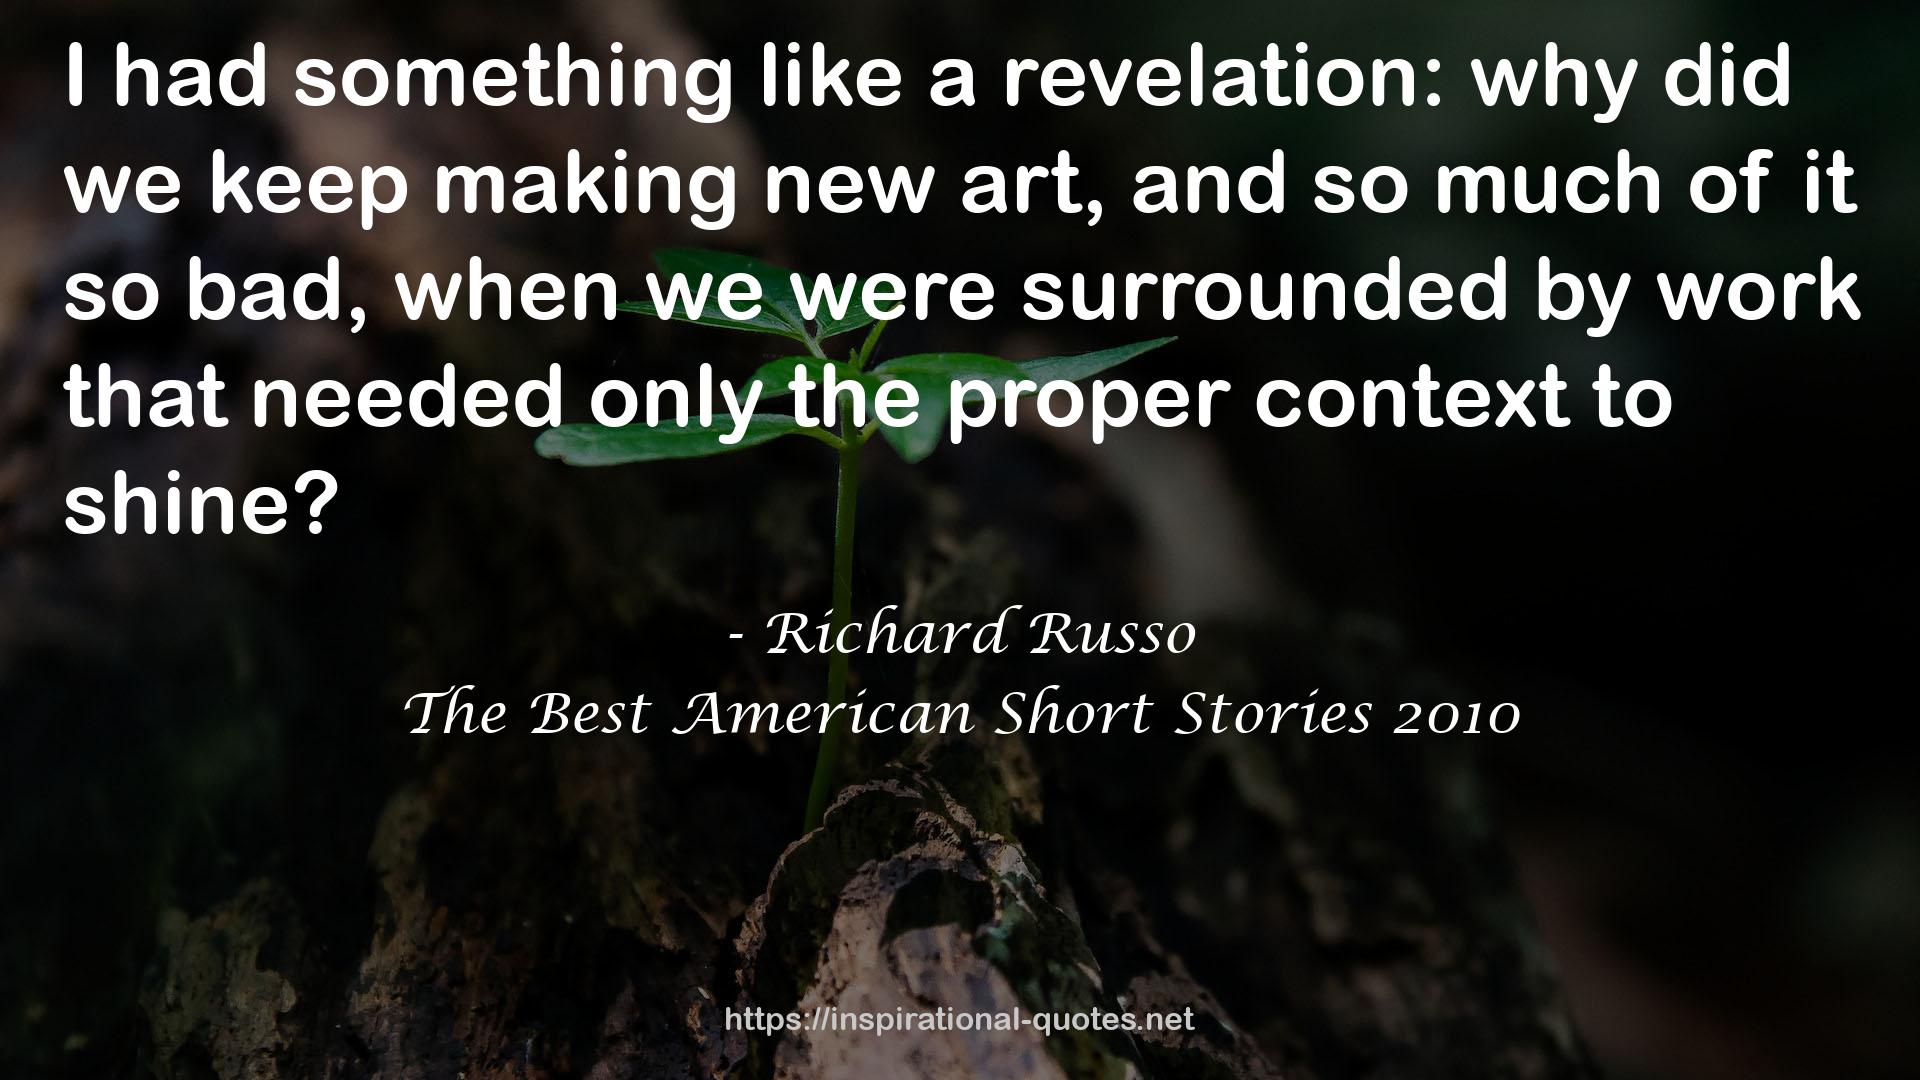 The Best American Short Stories 2010 QUOTES